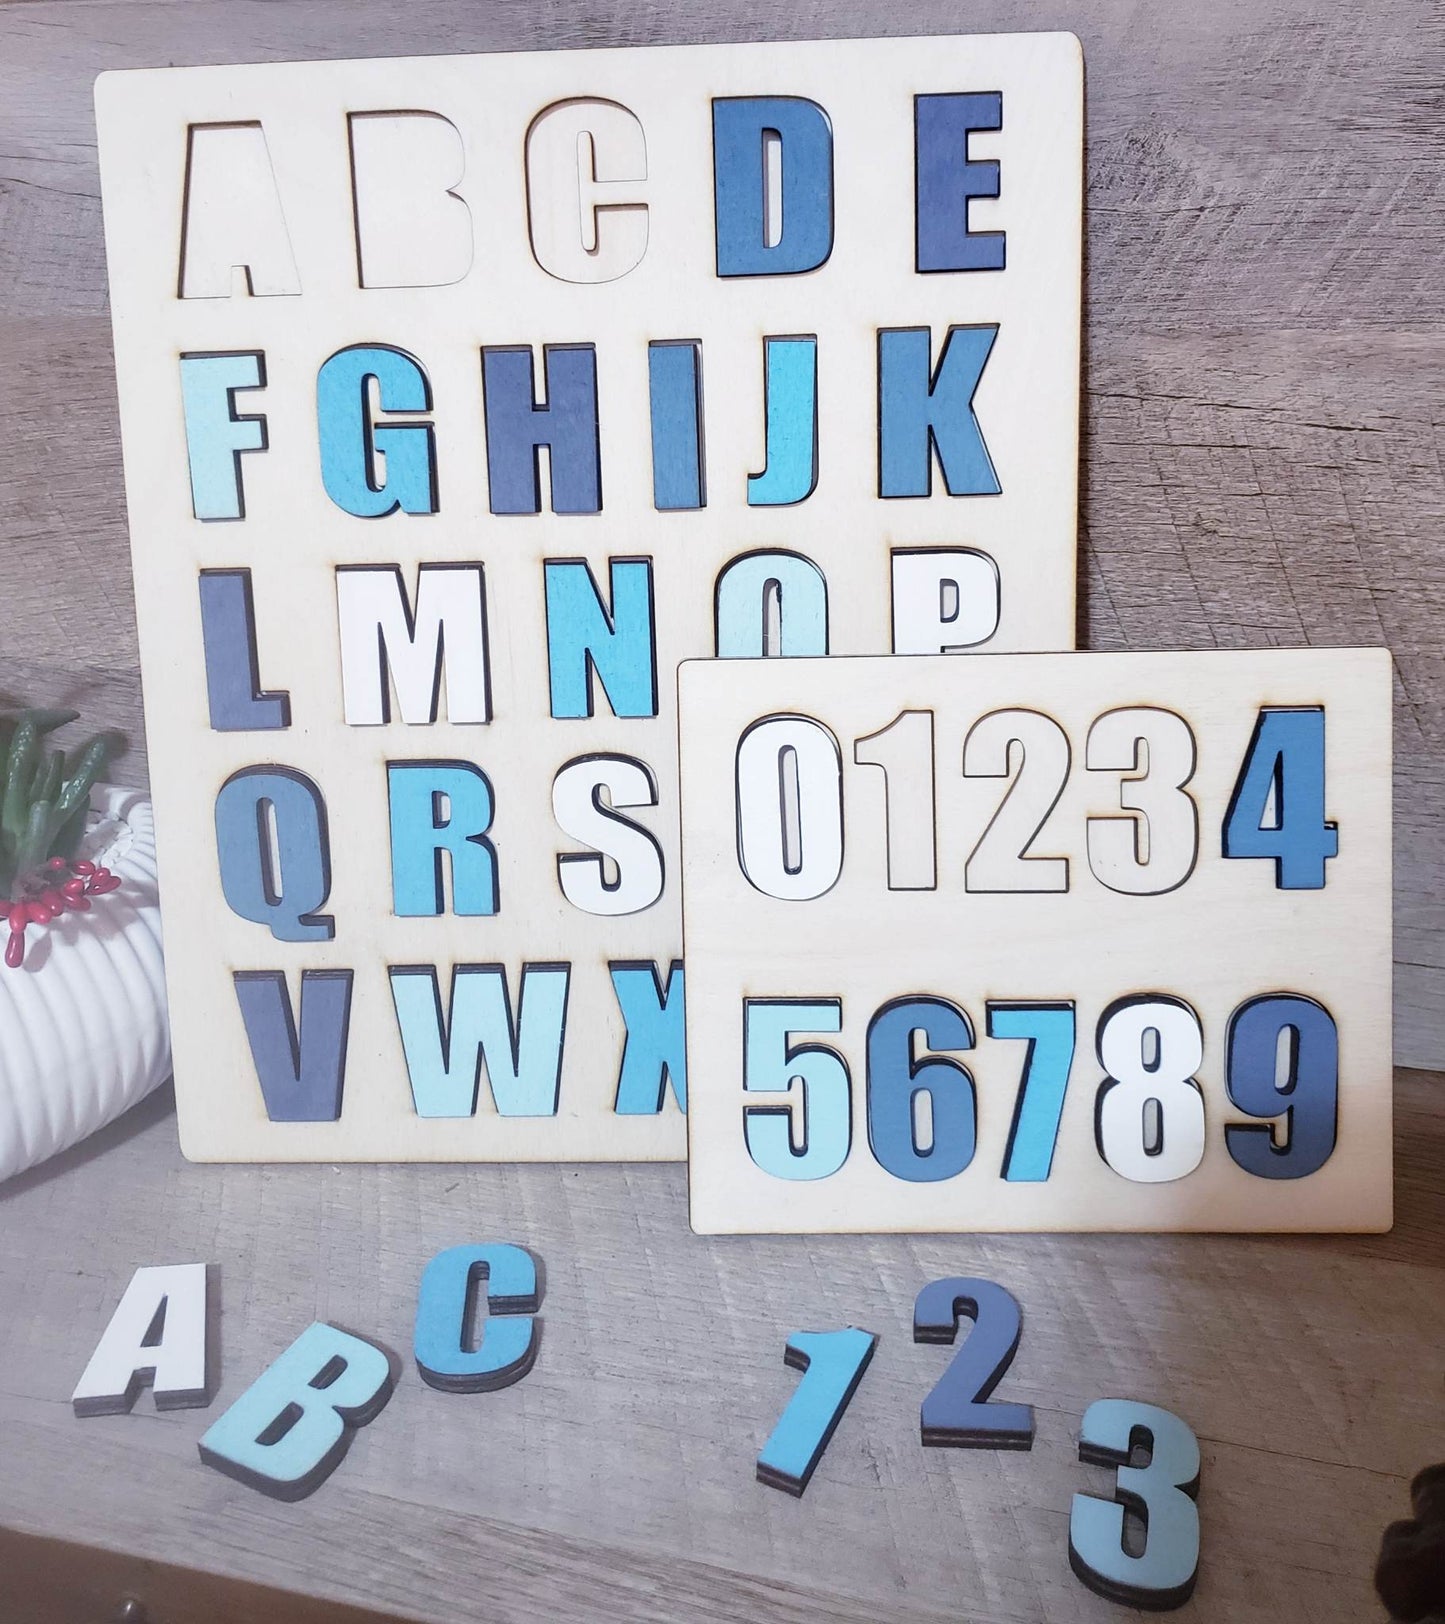 This ABC-123 Puzzle Bundle makes a perfect gift for children. It features two handcrafted Birch Wood puzzles with ABCs and 123s, designed to help children learn and explore in a fun way. The ABC puzzle measures 10x12 while the 123 puzzle measures 7x6, making them an excellent size for little hands. All puzzles are made with love and ship within 5-7 business days.